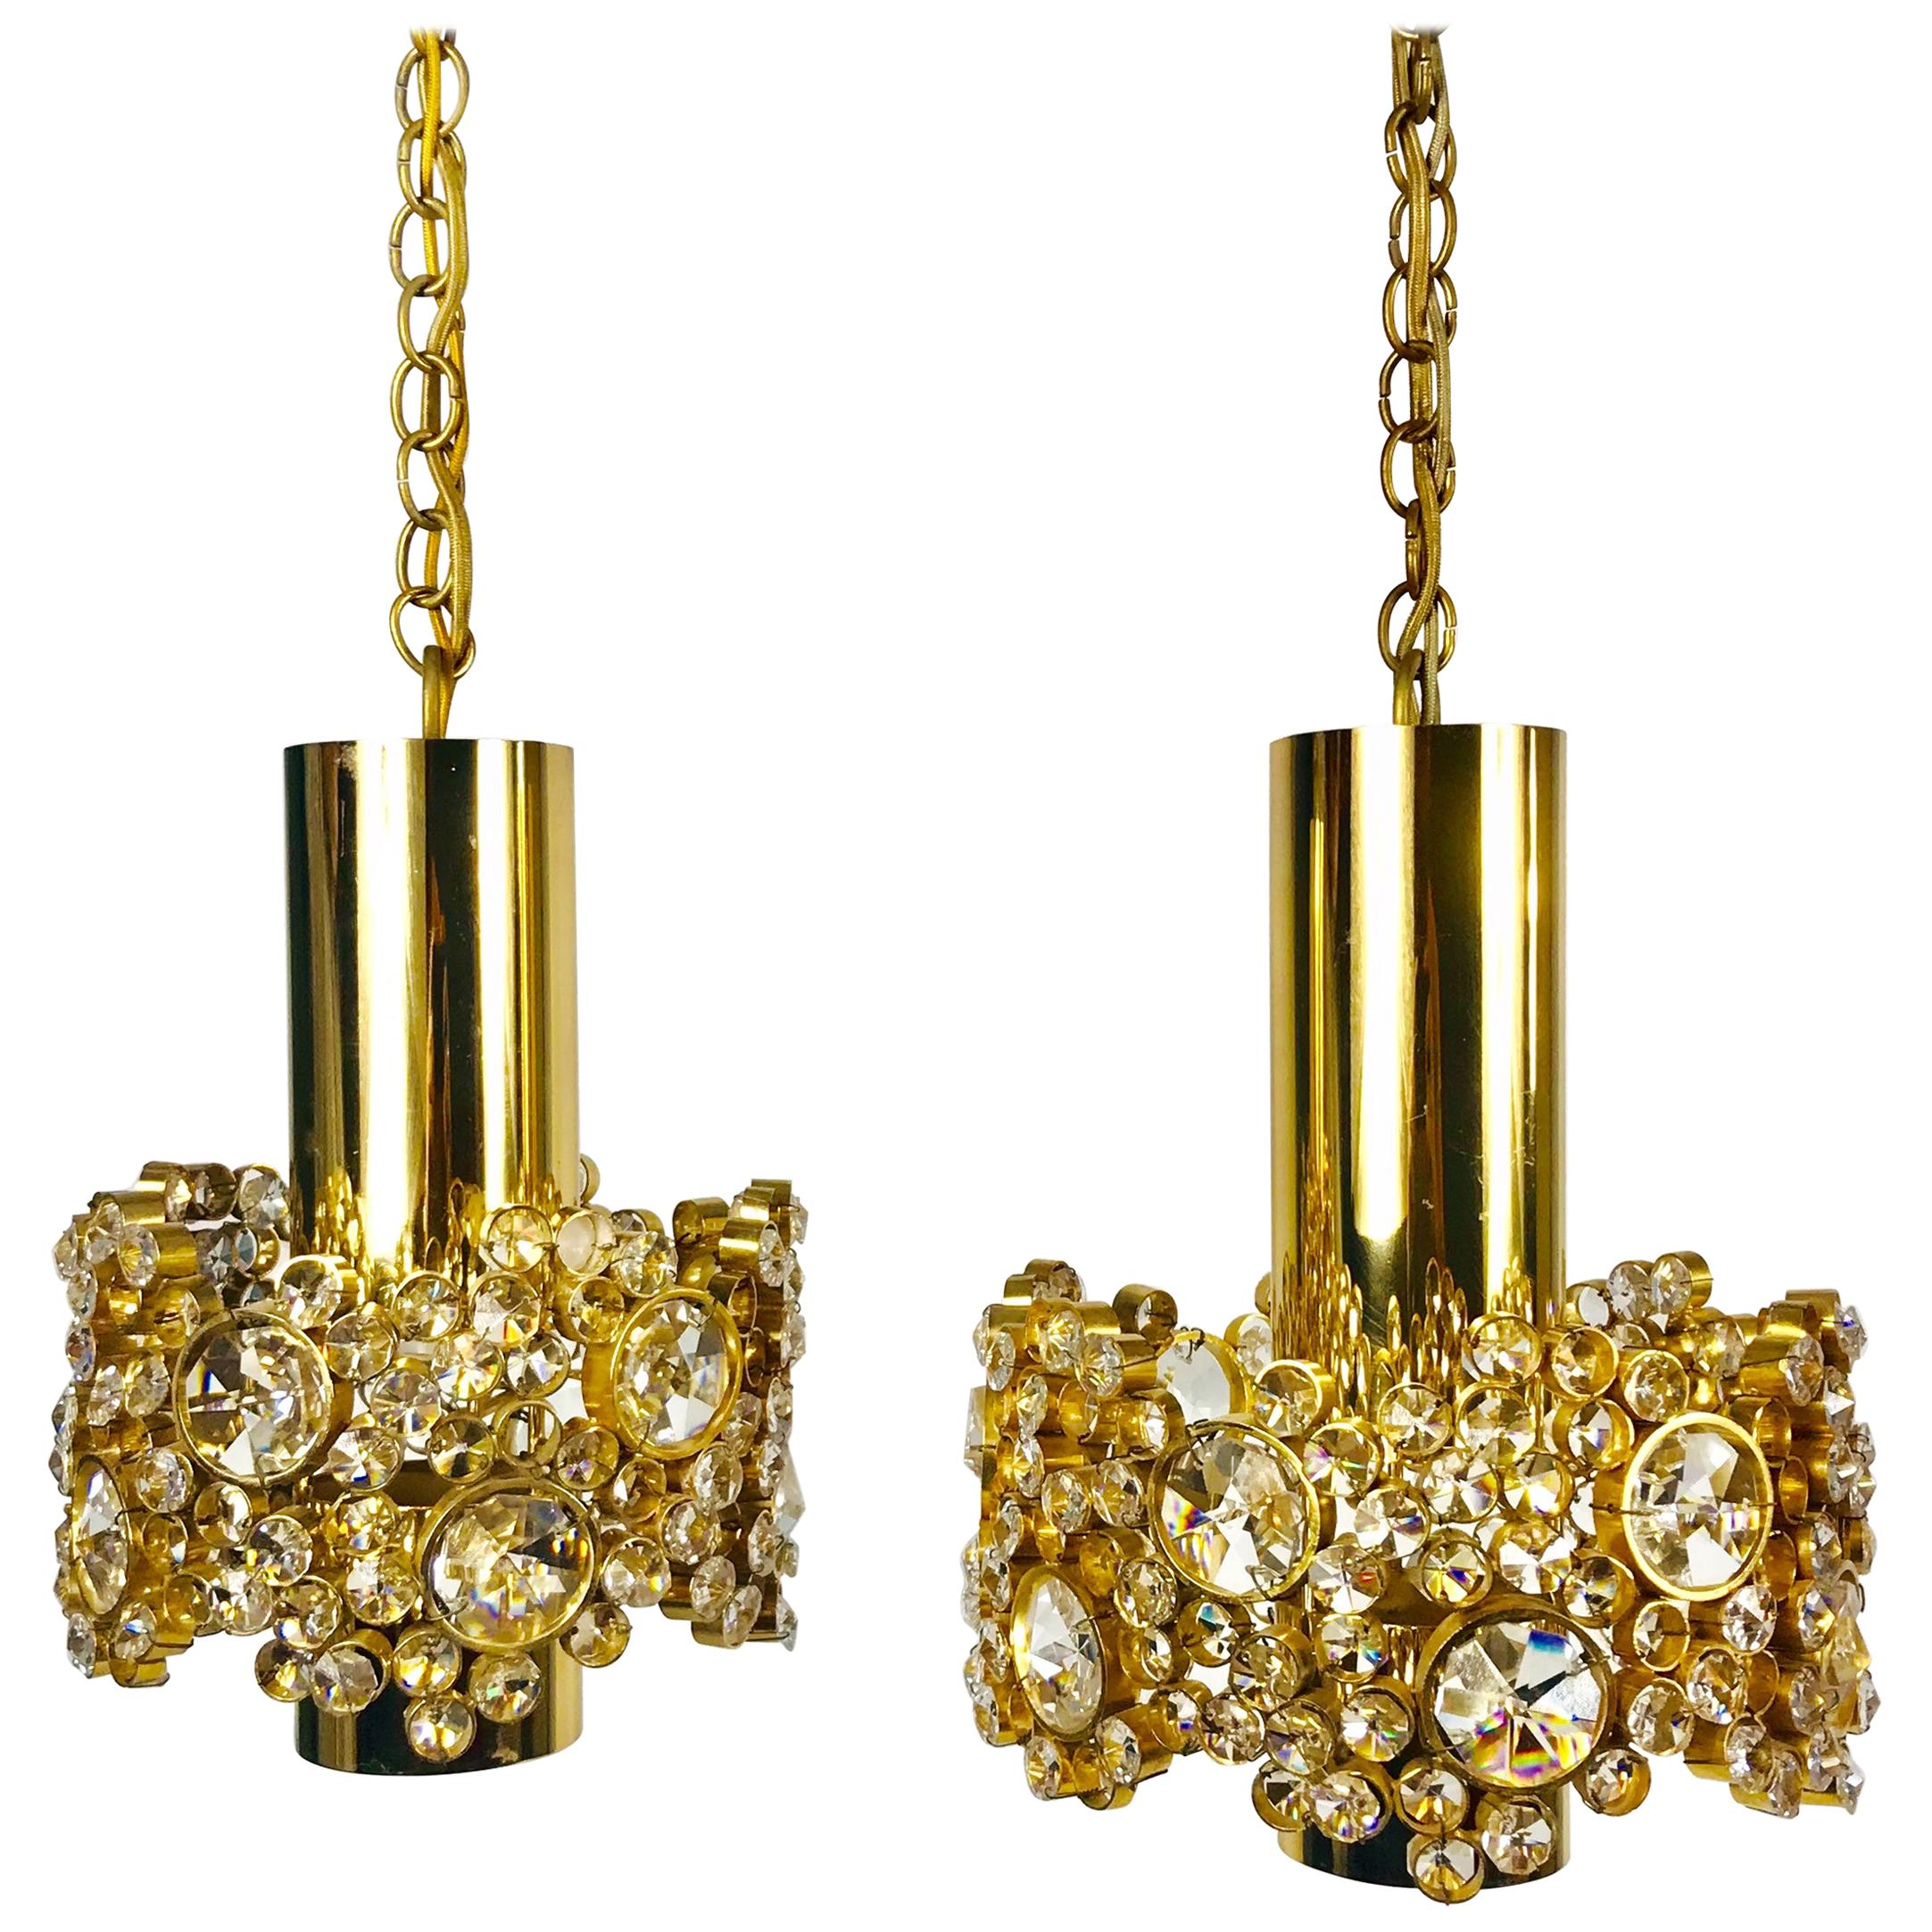 Pair of Gilt Brass and Crystal Glass Chandeliers by Palwa, Germany, 1970s For Sale